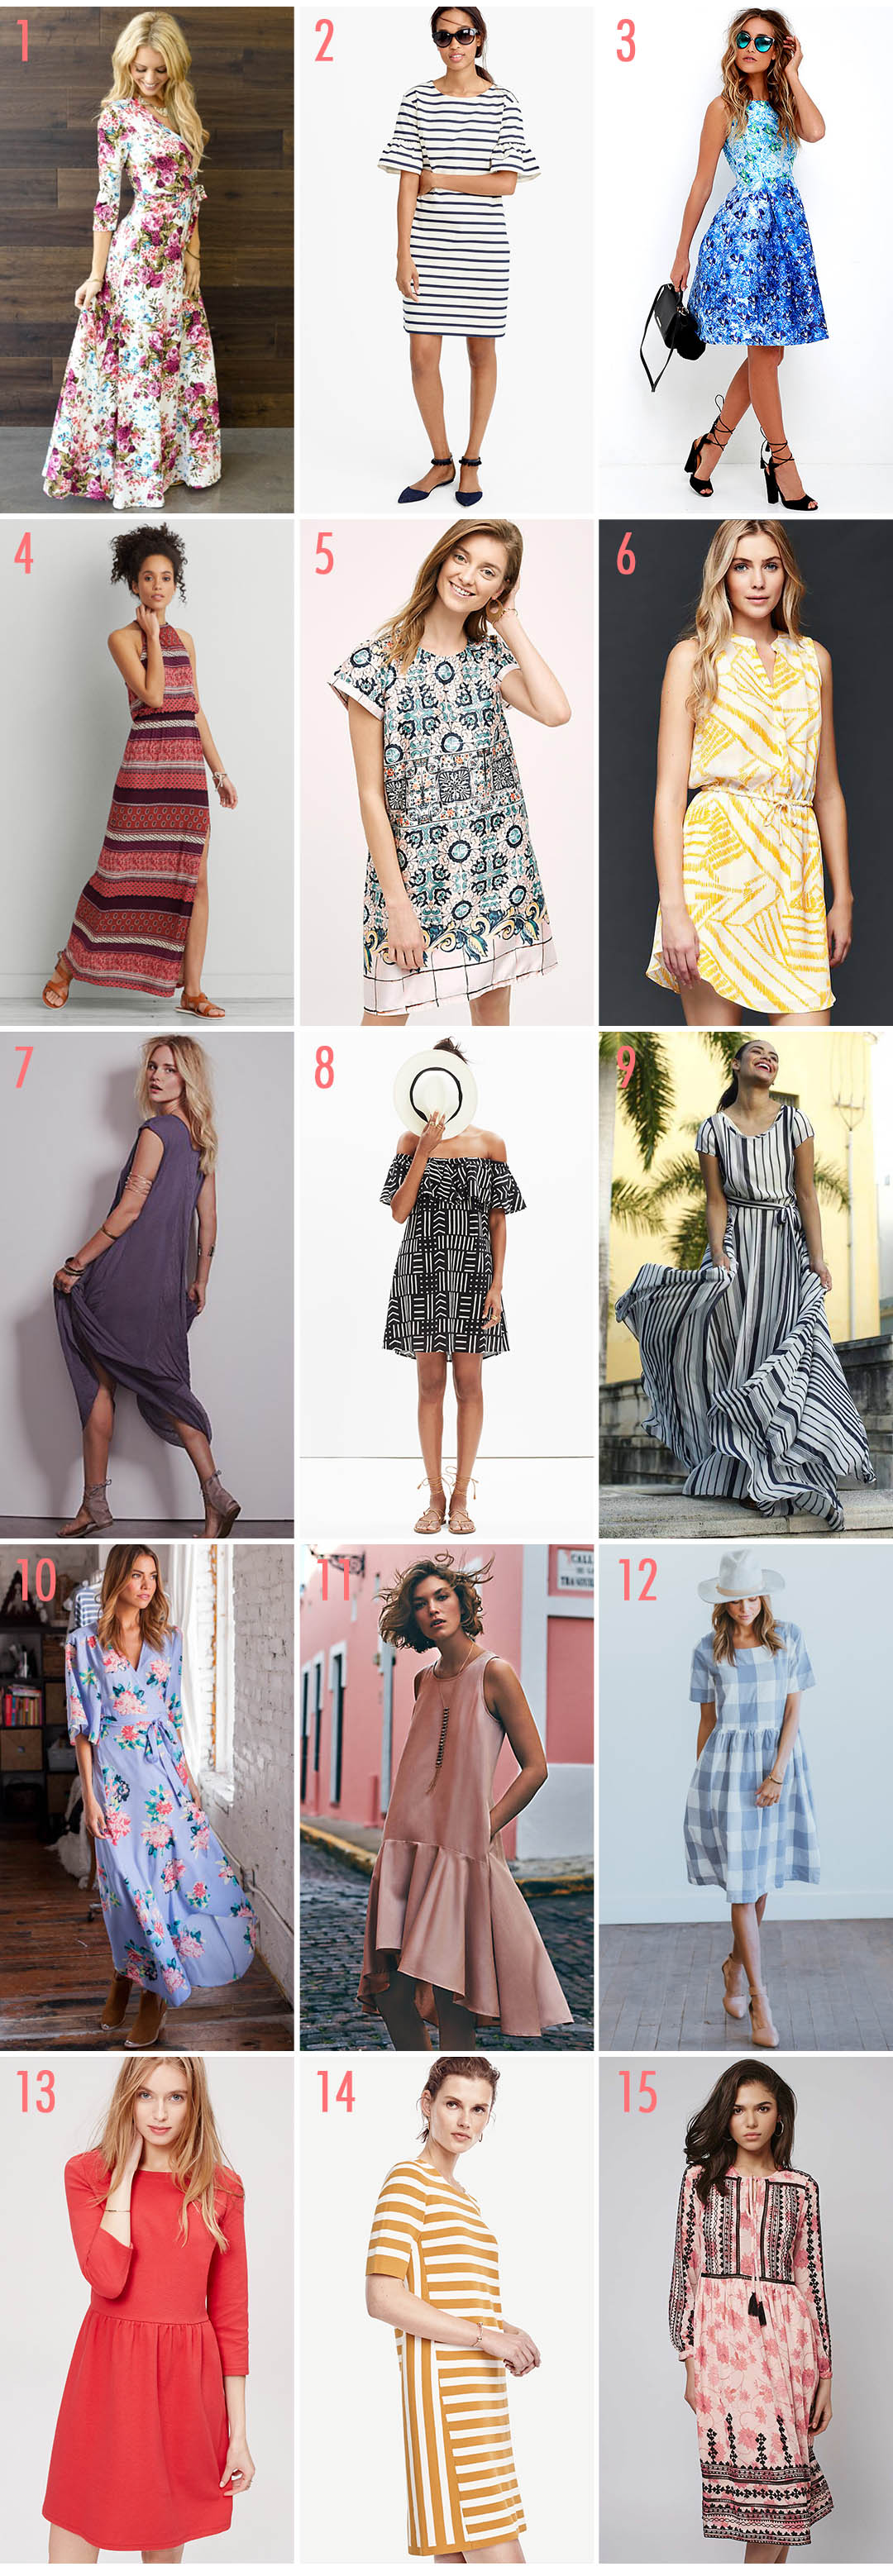 15-dresses-for-spring-layout-1